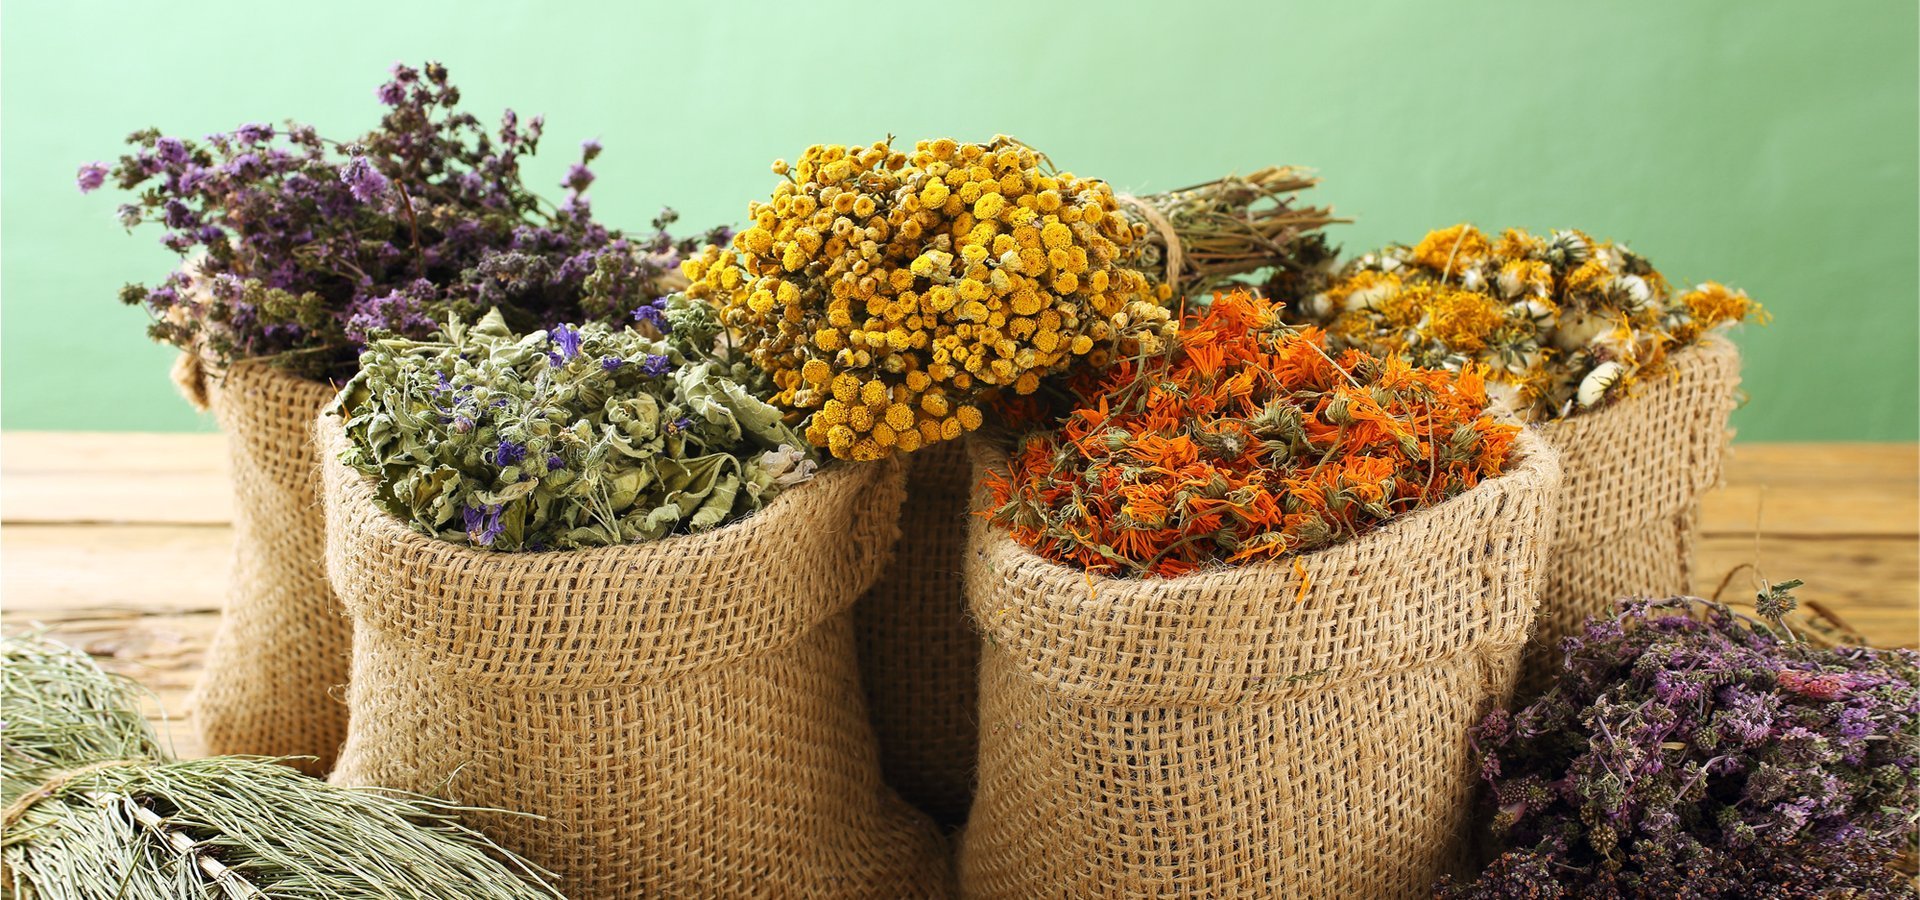 Organic Herbal Solutions for Your Life